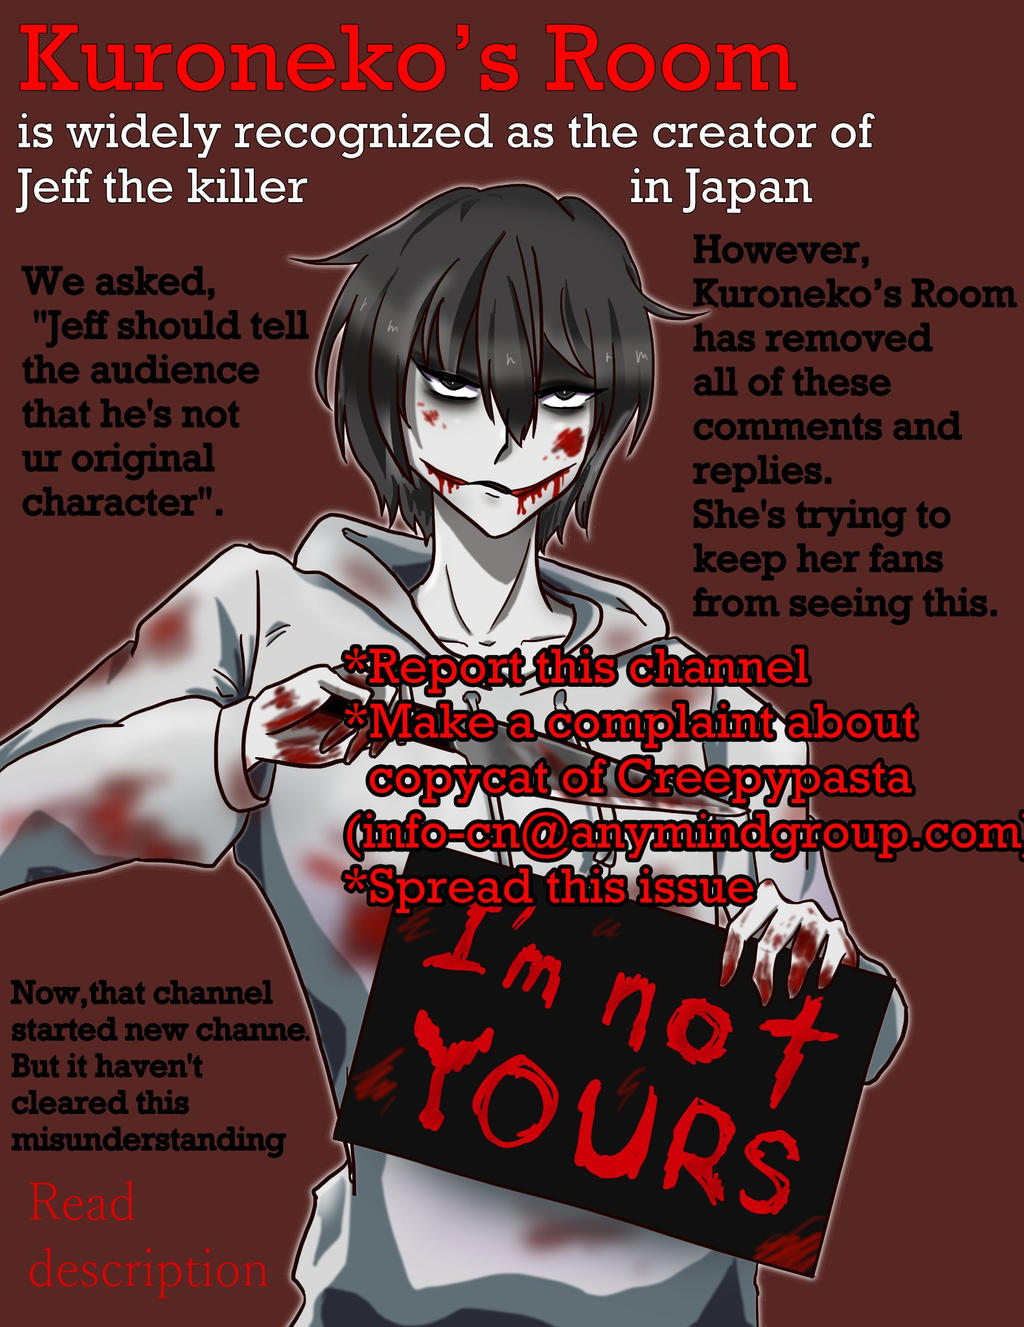 Introducing jeff the Killer, Creepypasta and scary stories